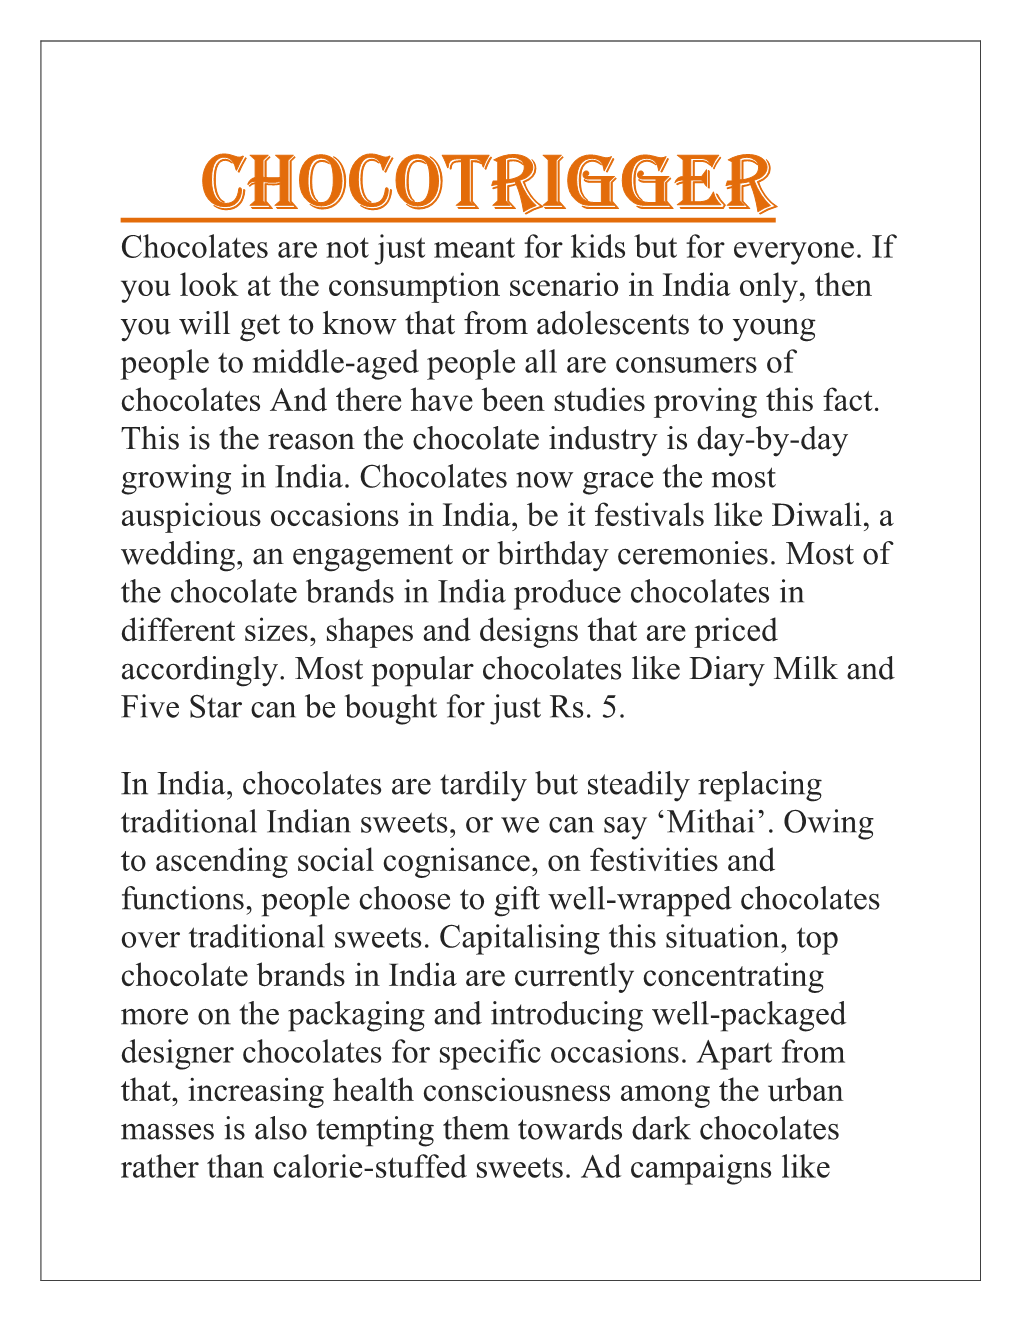 CHOCOTRIGGER Chocolates Are Not Just Meant for Kids but for Everyone